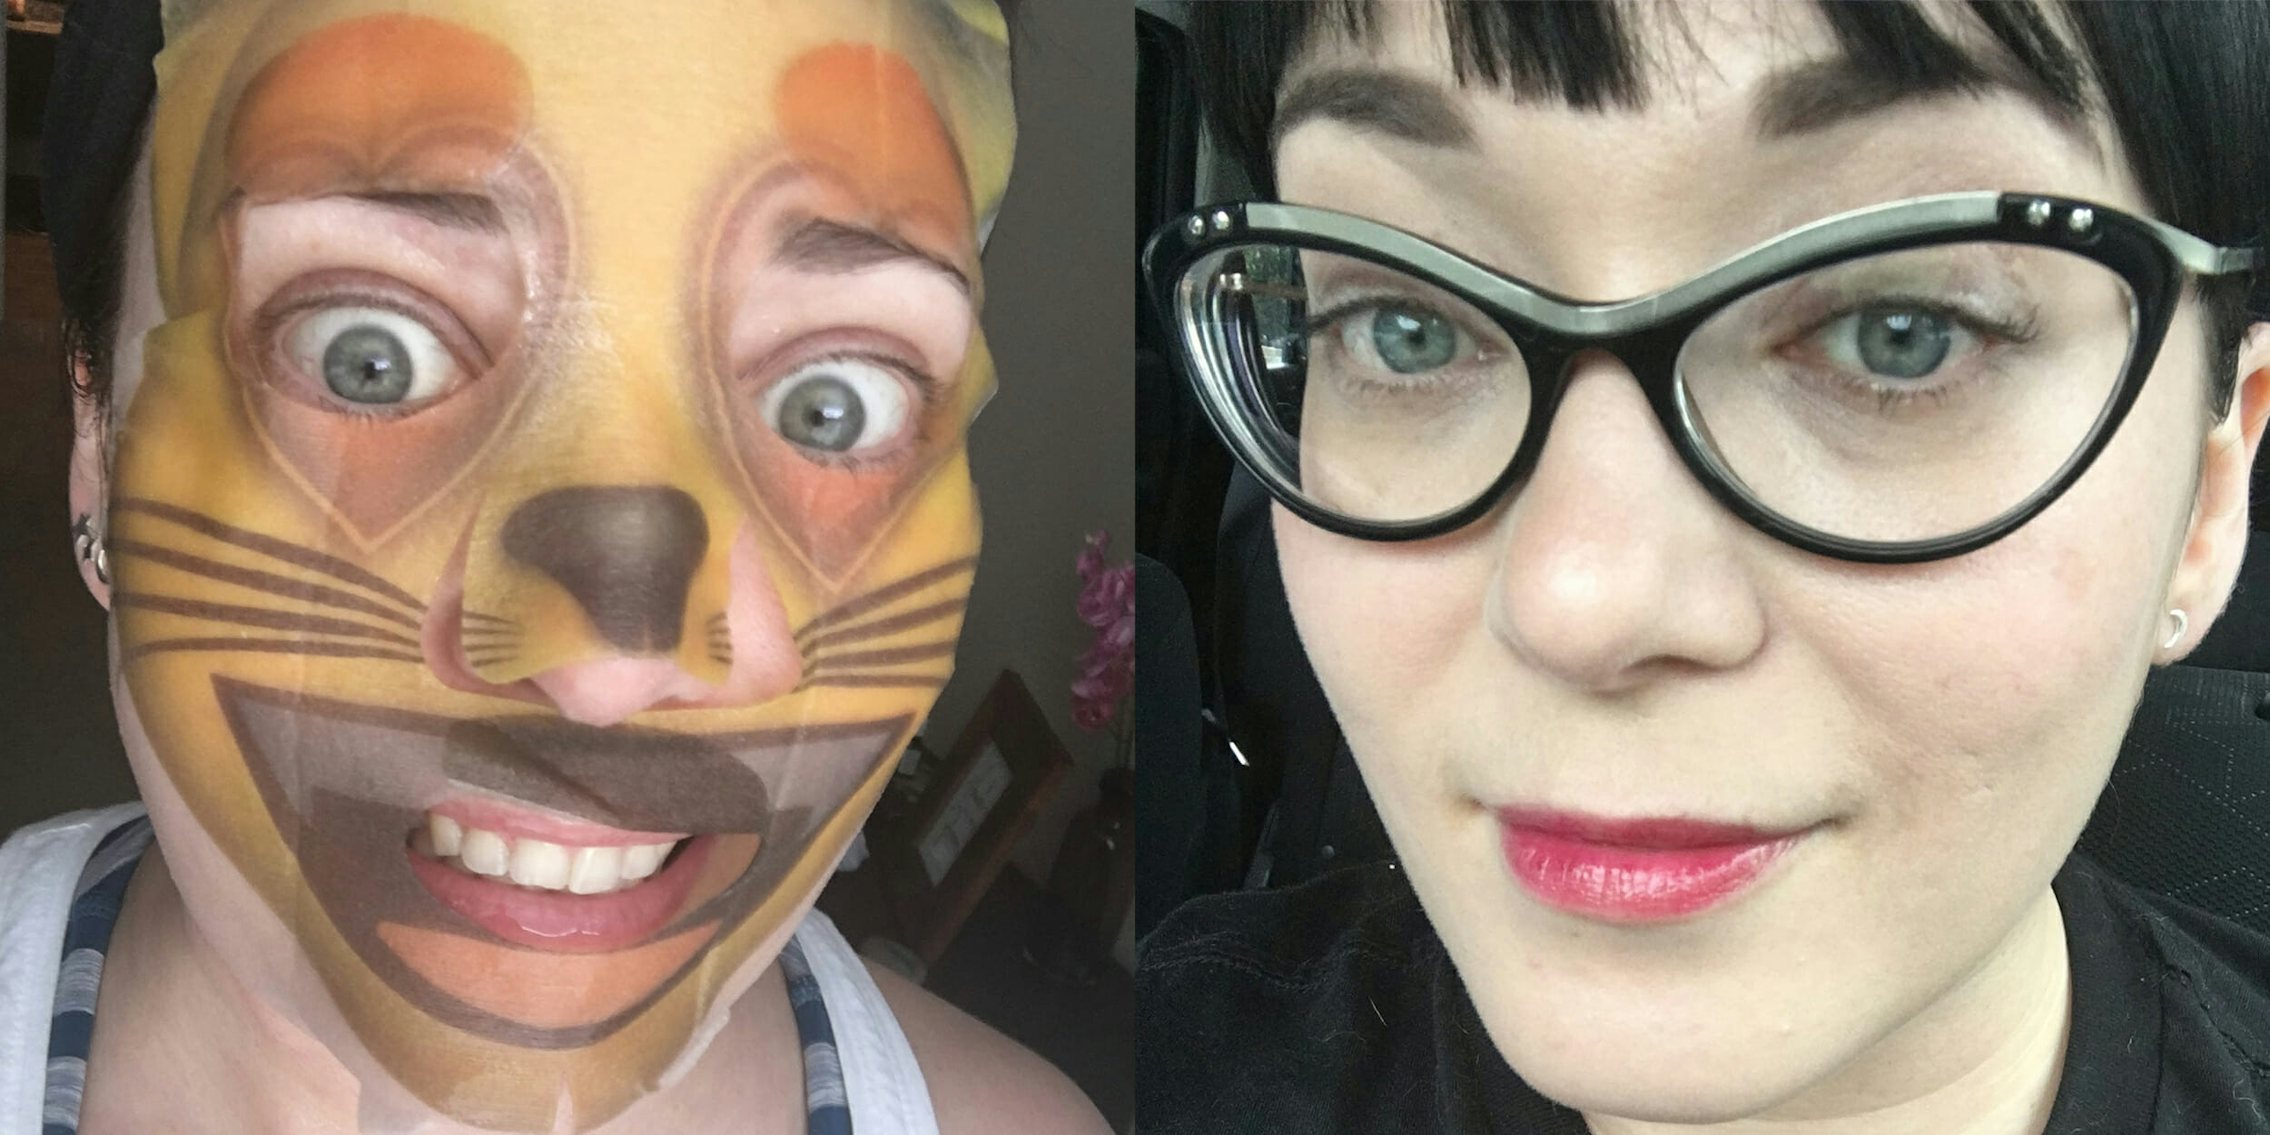 Woman wearing cat emoji facial mask before and after